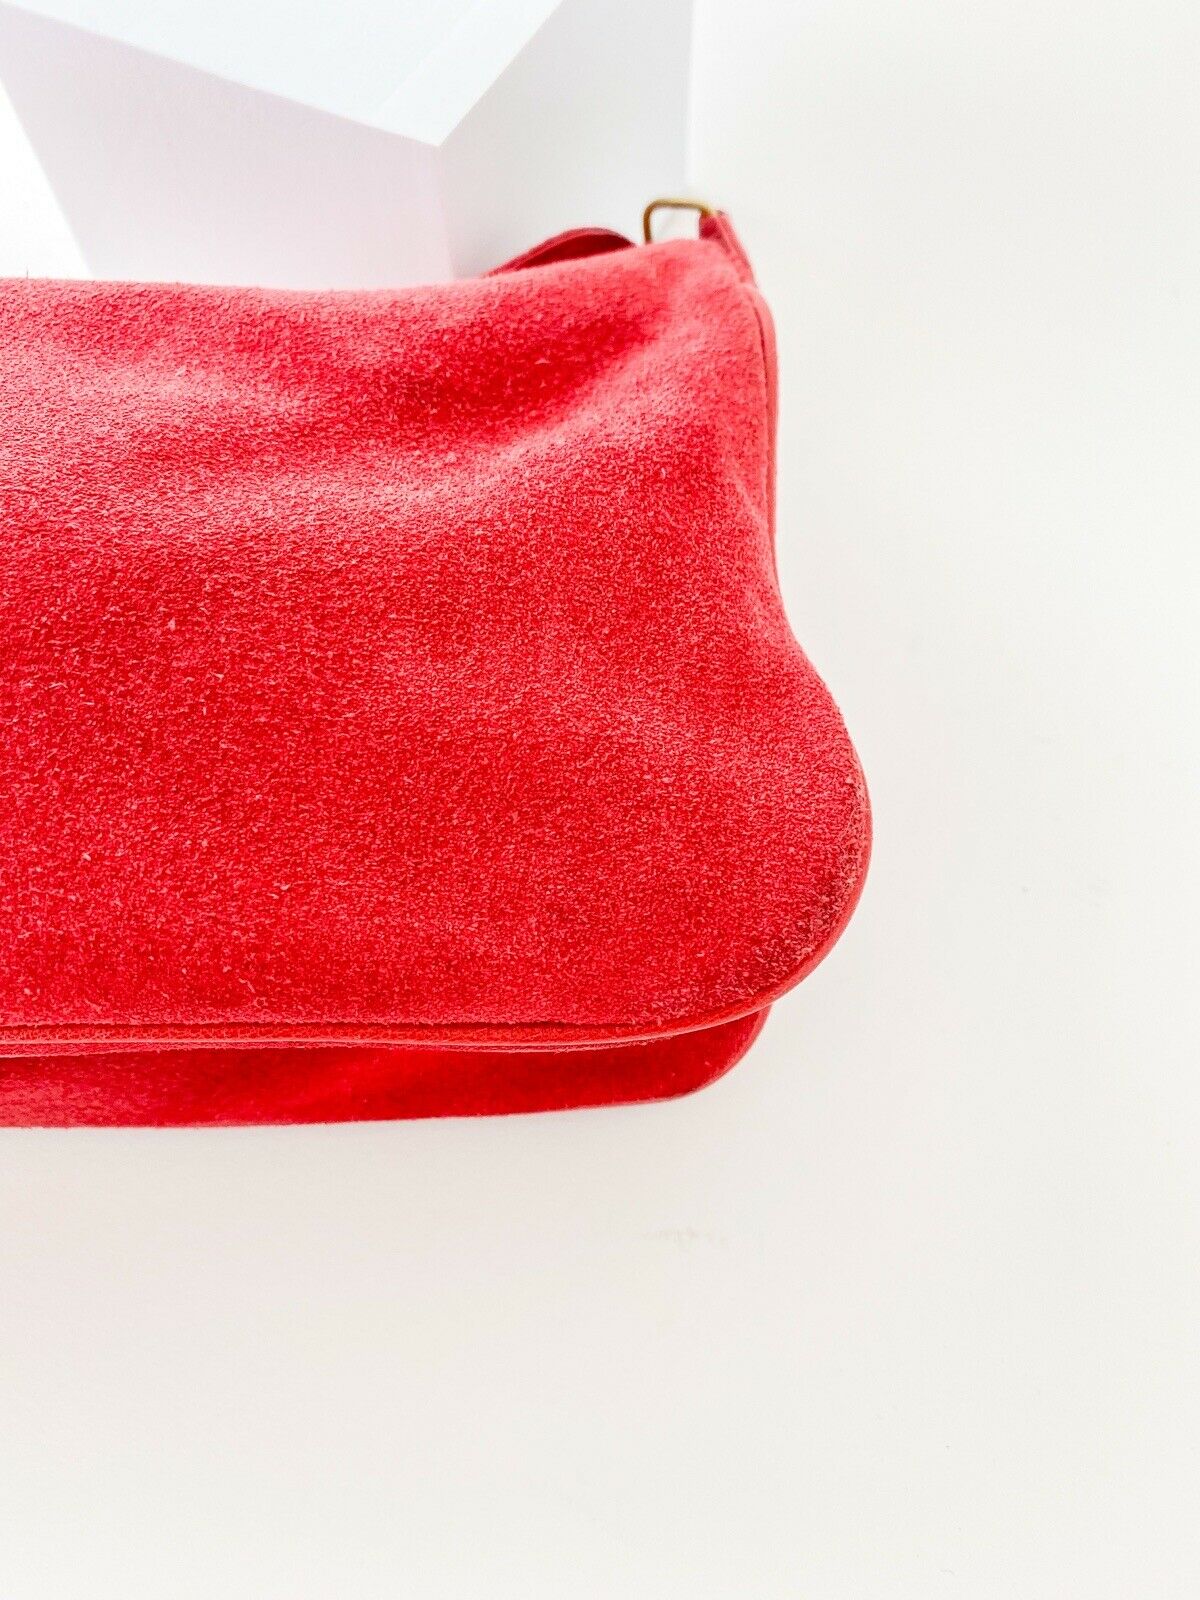 【SOLD OUT】NINA RICCI Red Suede Leather Shoulder Bag Handbag Made in Italy